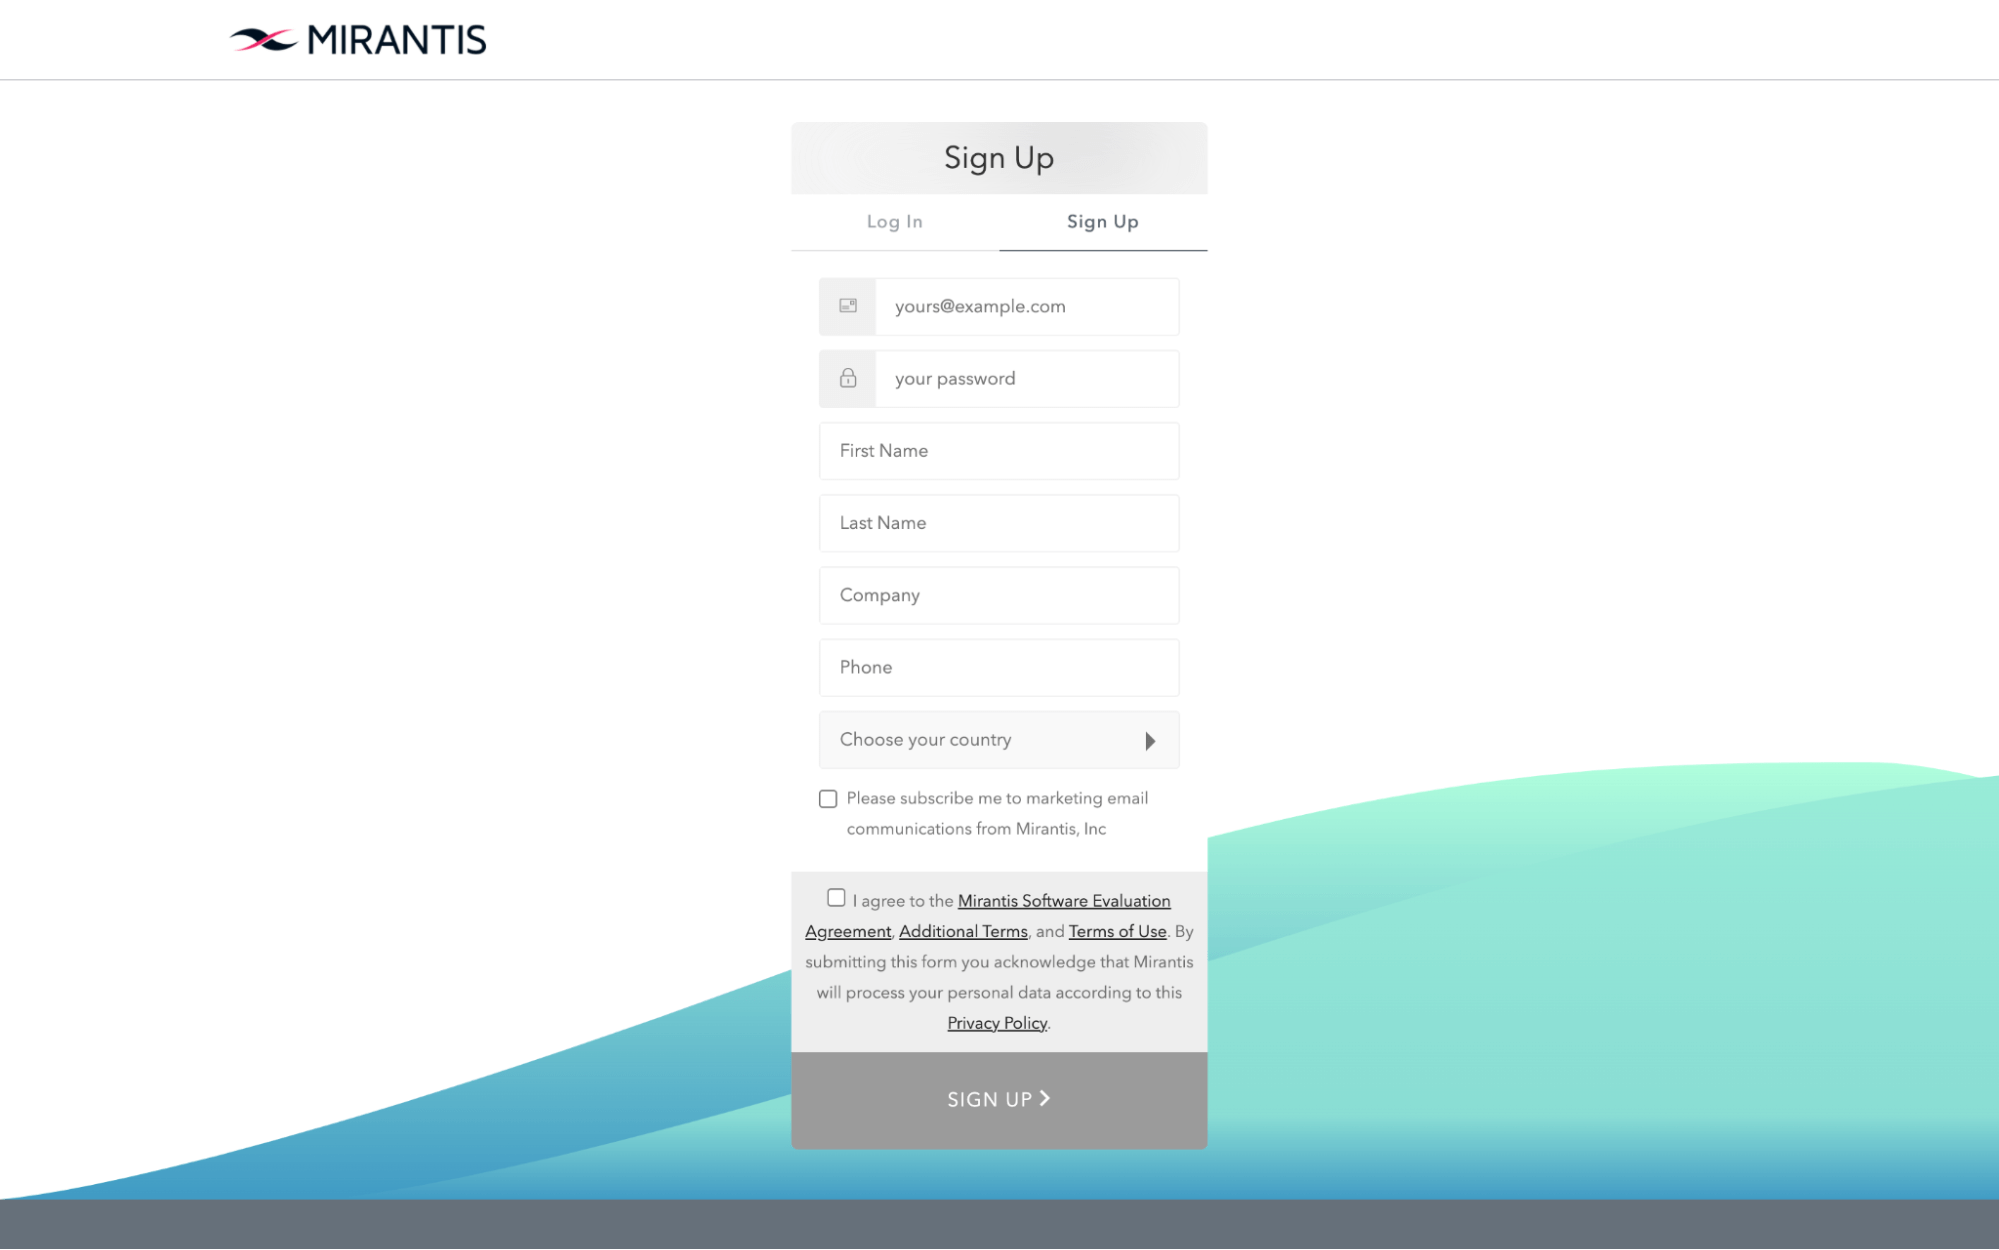 mirantis container cloud hosted trial sign up webpage